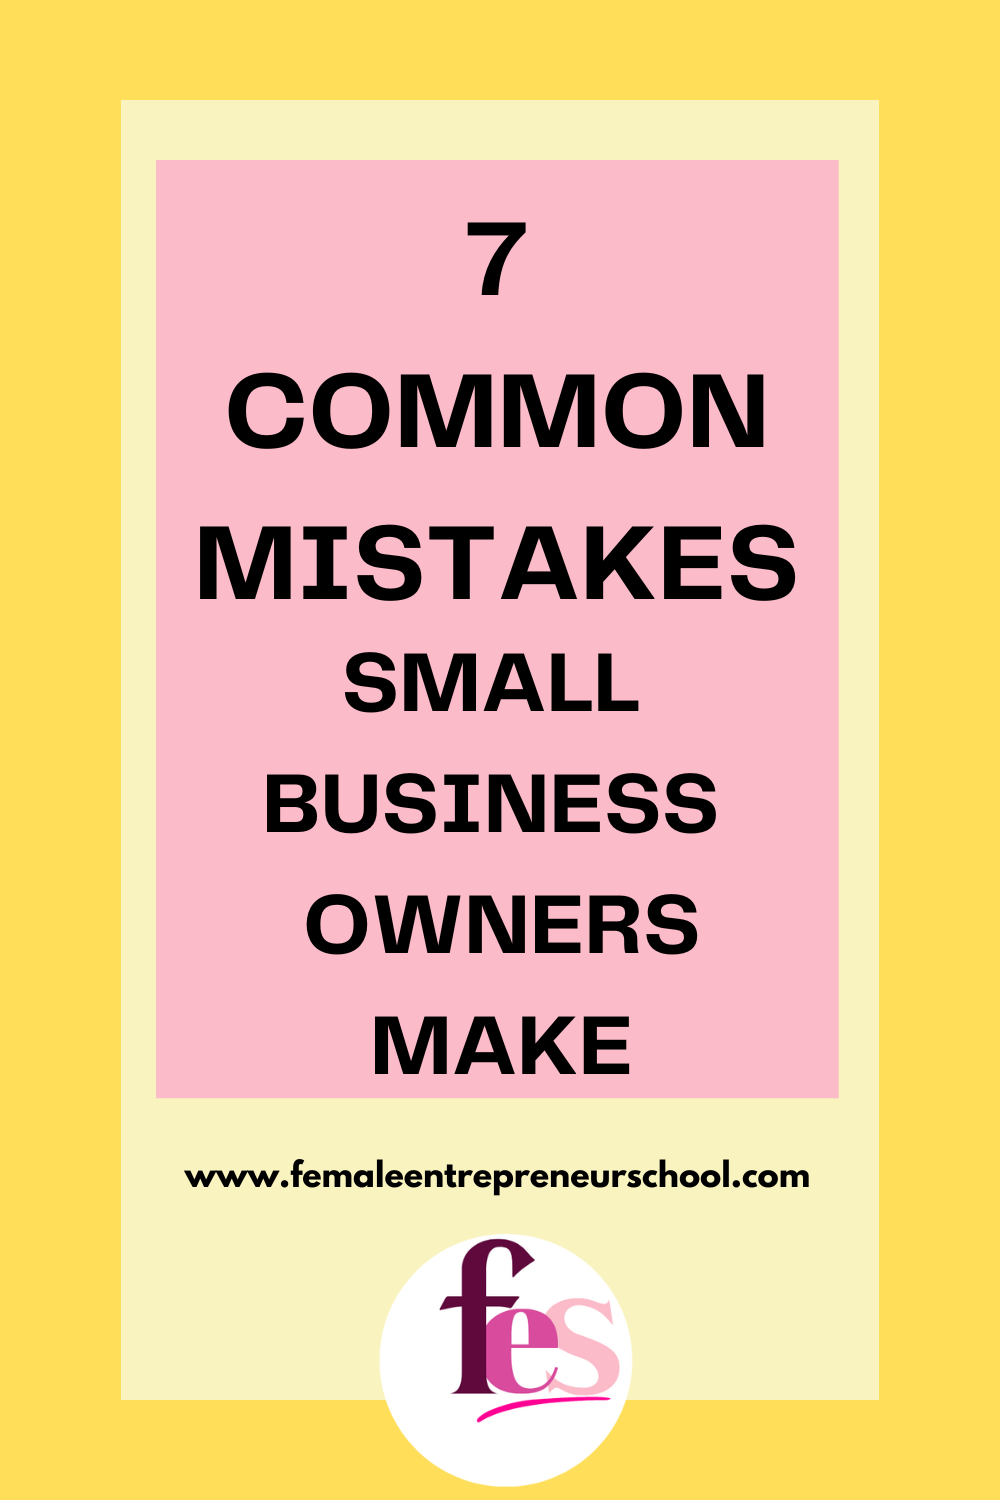 7 COMMON MISTAKES SMALL BUSINESS OWNERS MAKE - text on pink and yellow background